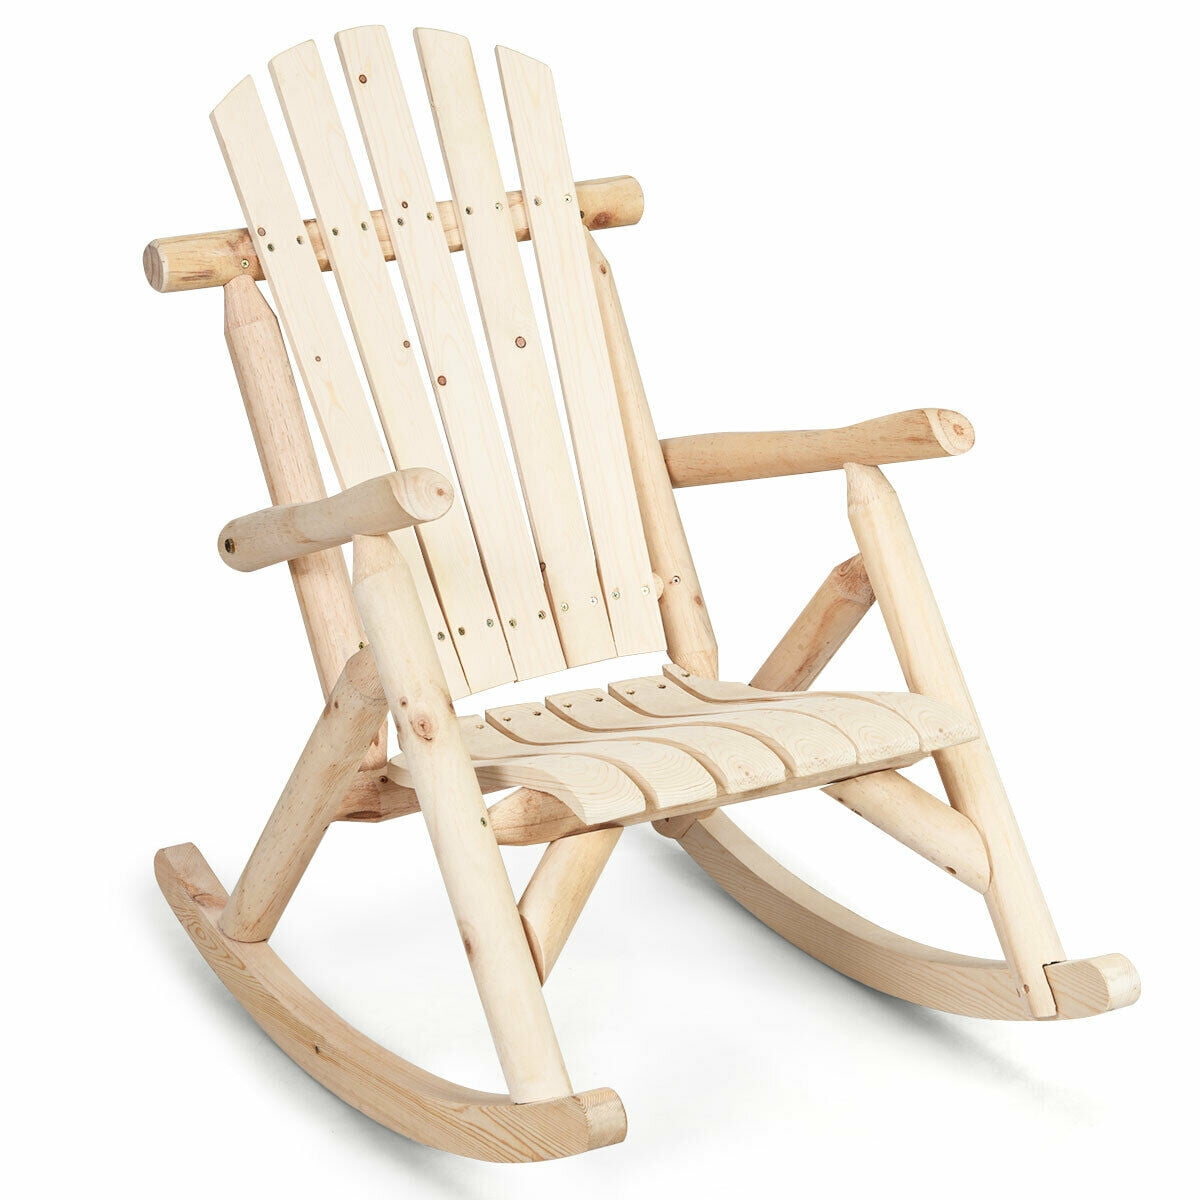 Outdoor Wood 2-Person Double Rocking Chair Patio Porch Deck Classic White Brown 